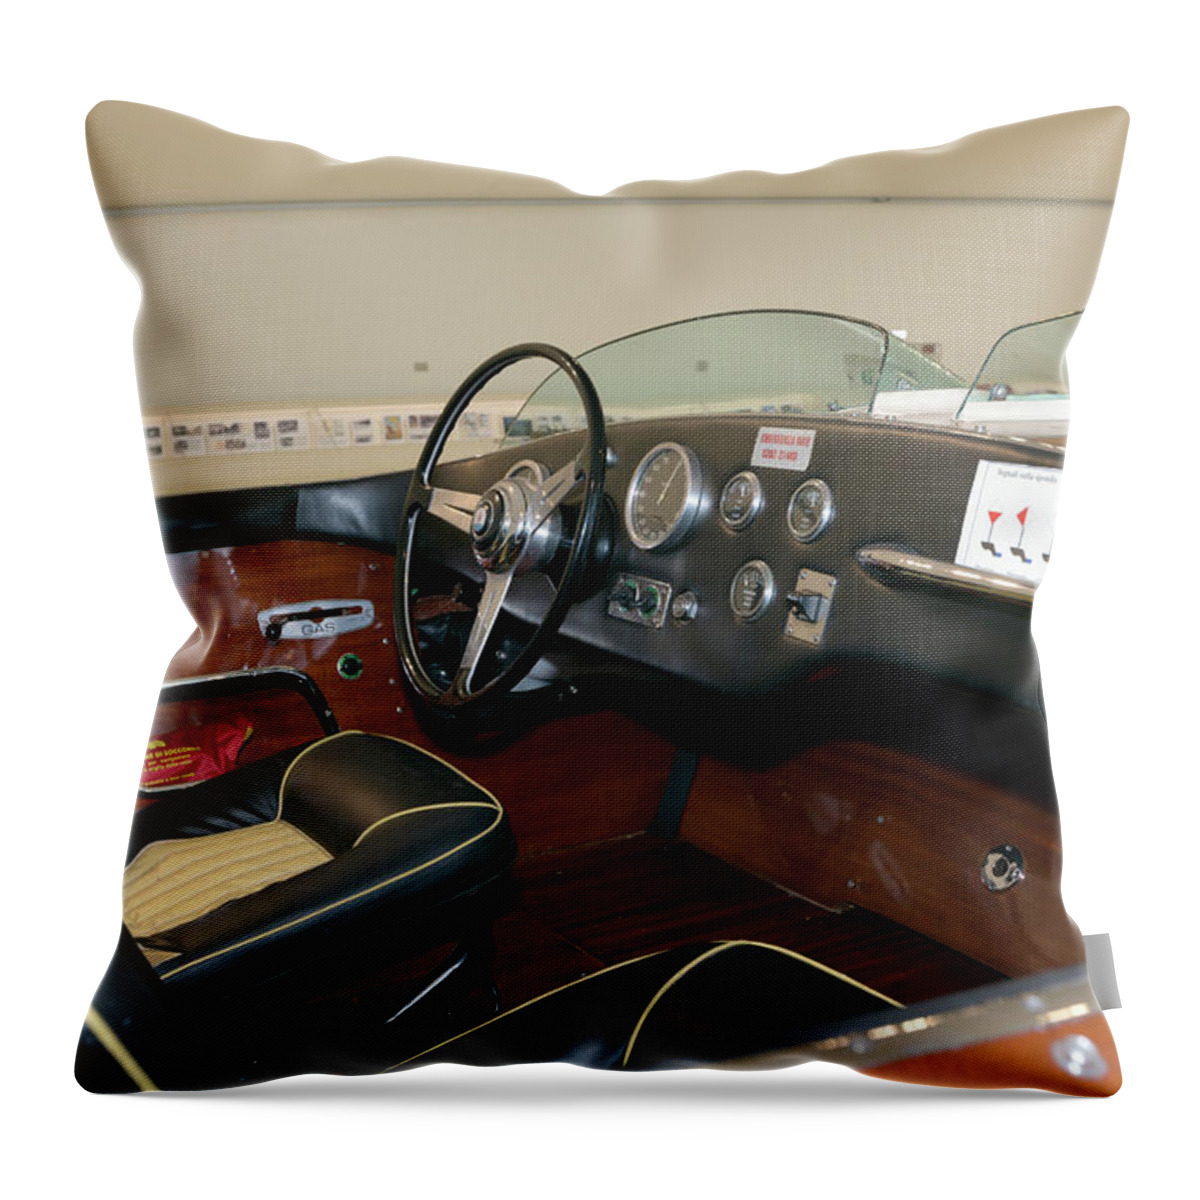 San Marco-maserati Racing Boat (1963) Cockpit Enzo Ferrari Museum Throw Pillow featuring the photograph San Marco Maserati racing boat 1963 cockpit Enzo Ferrari Museum by Paul Fearn